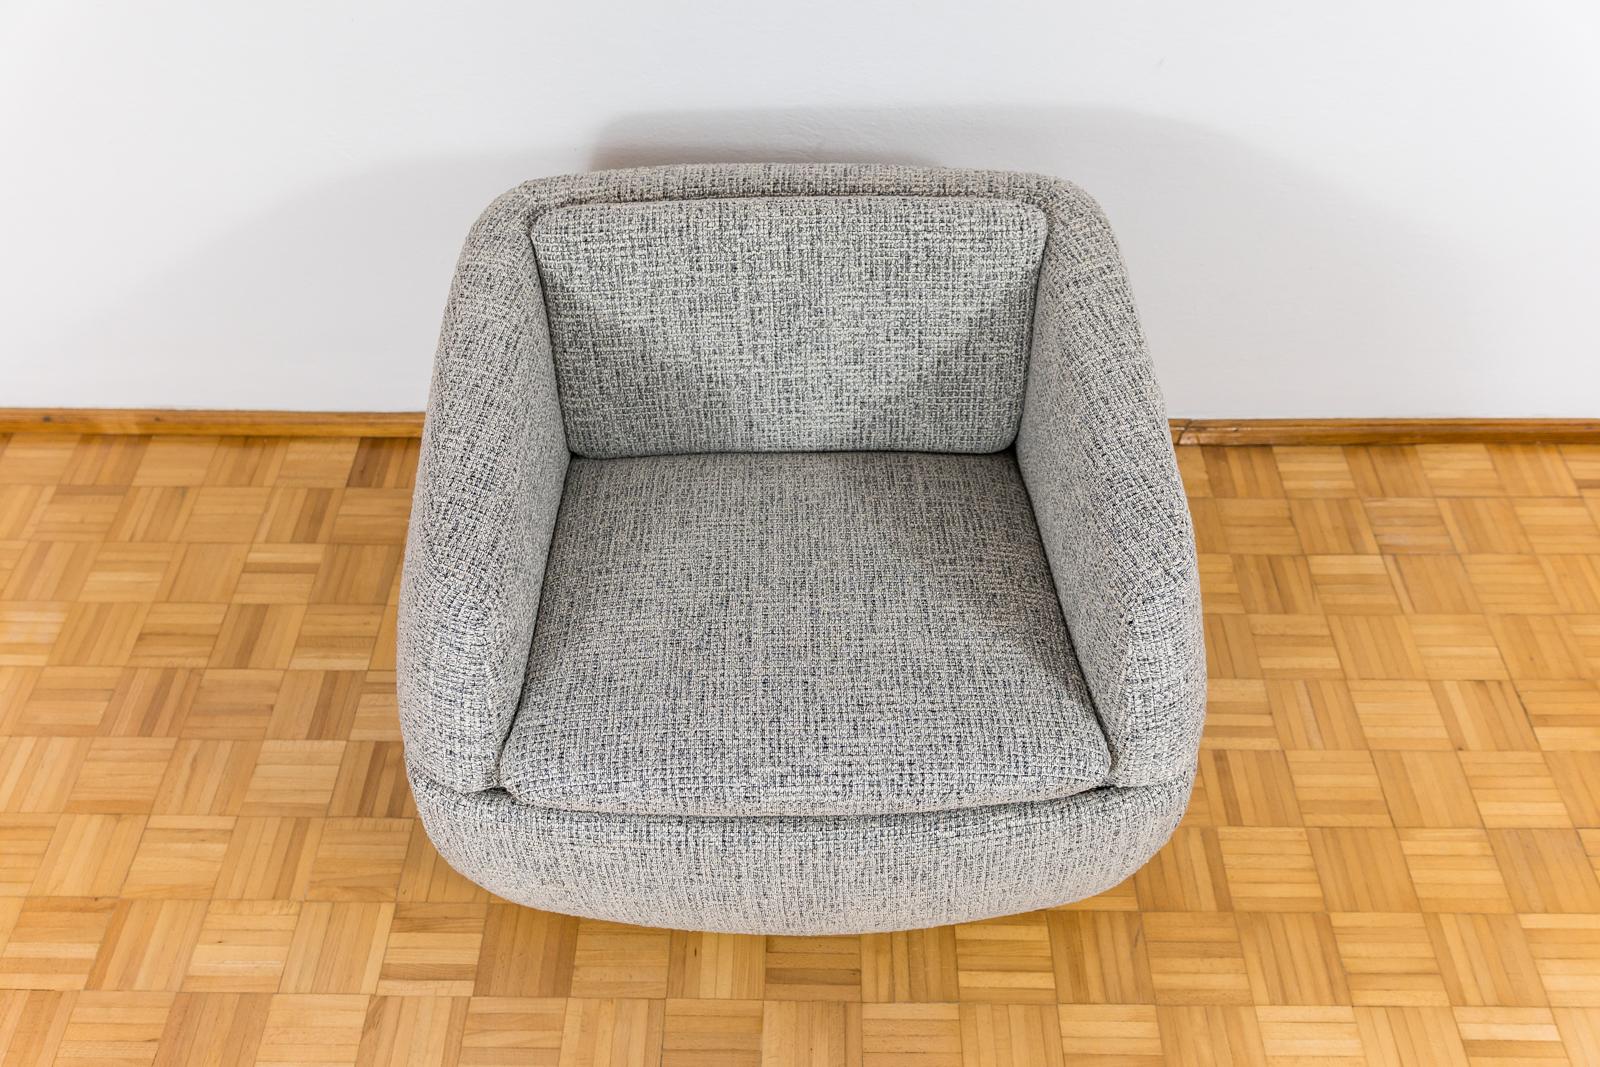 Customizable Space Age Lounge Chair From Lubuskie Fabryki Mebli, 1970s For Sale 7